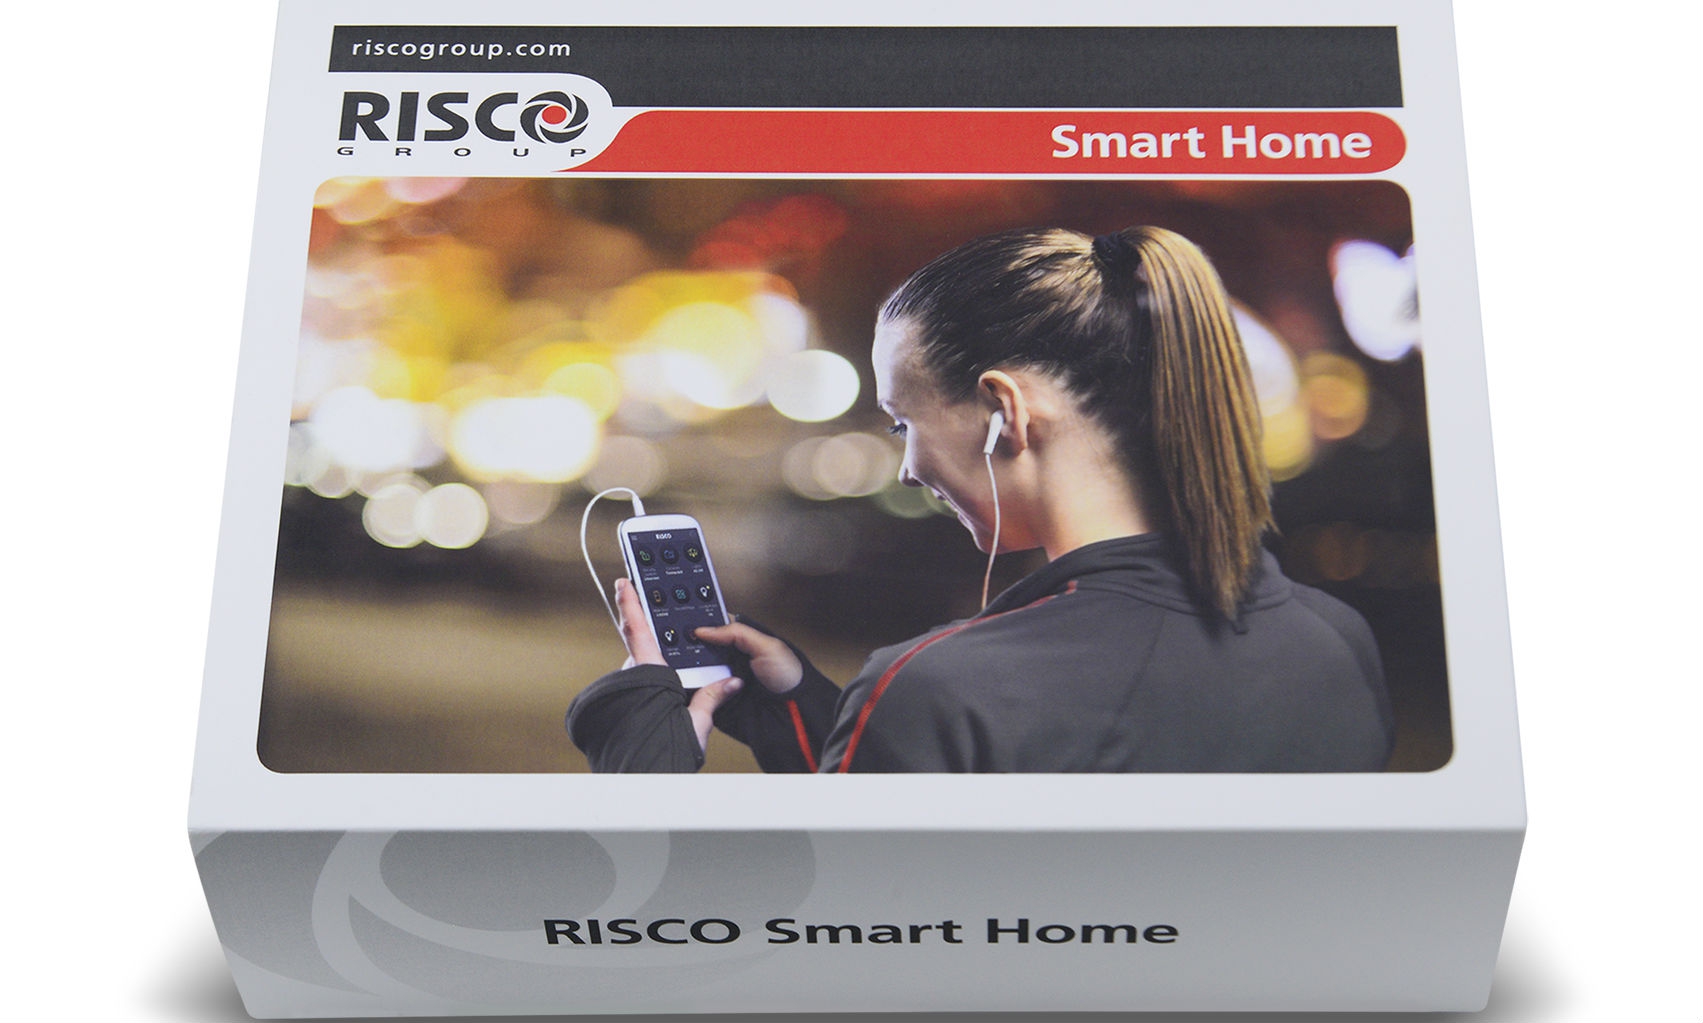 RISCO leads the way with launch of RISCO Smart Home